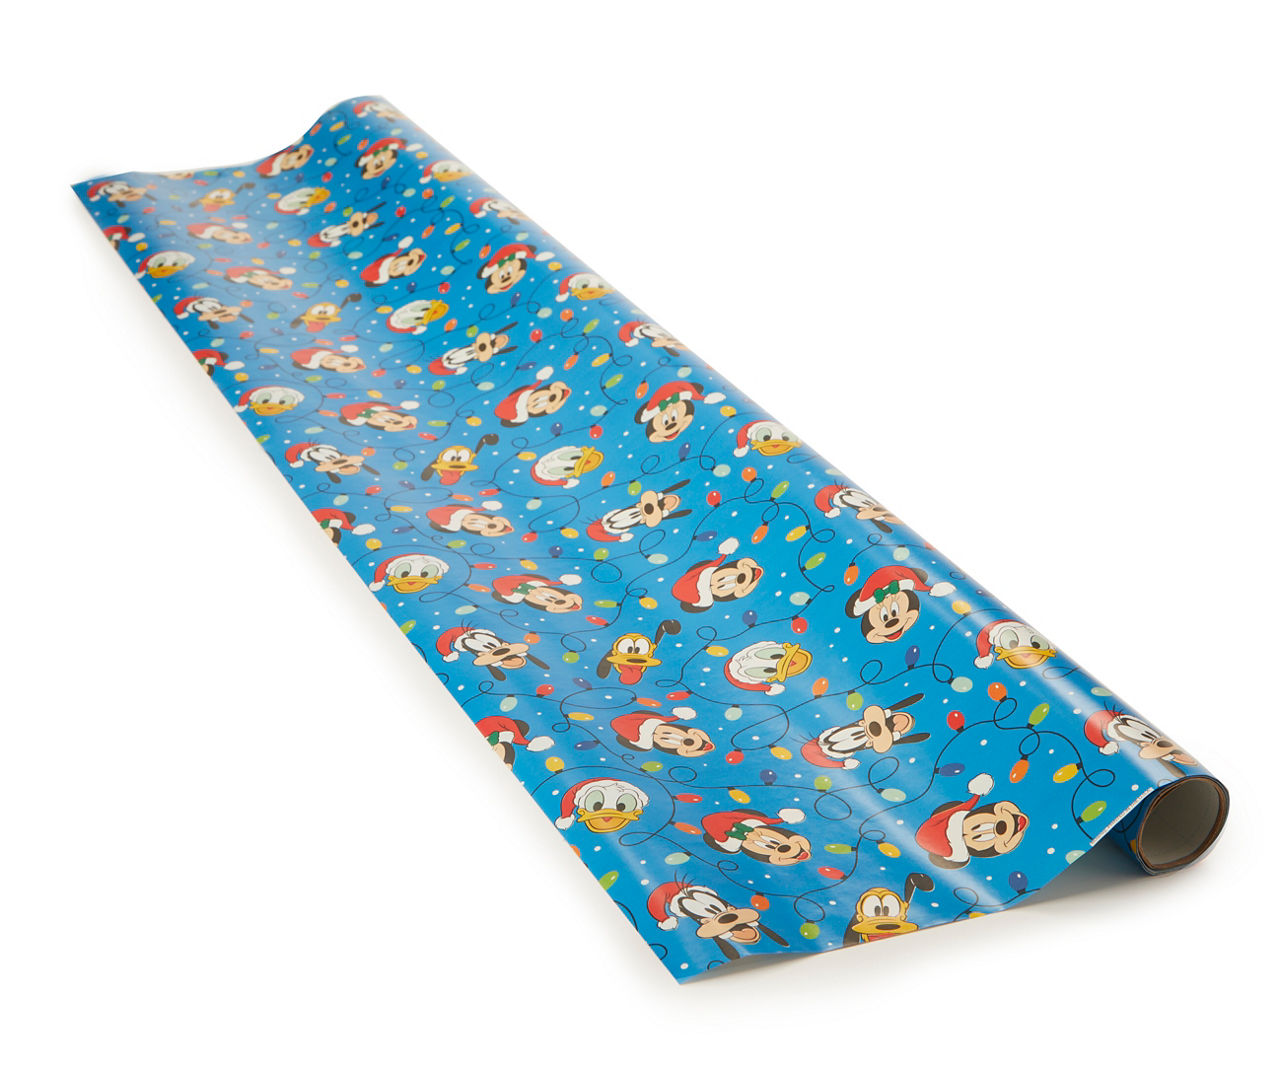 Disney Mickey Mouse and Pluto on Blue Wrapping Paper, 17.5 sq. ft. -  Wrapping Paper - Hallmark